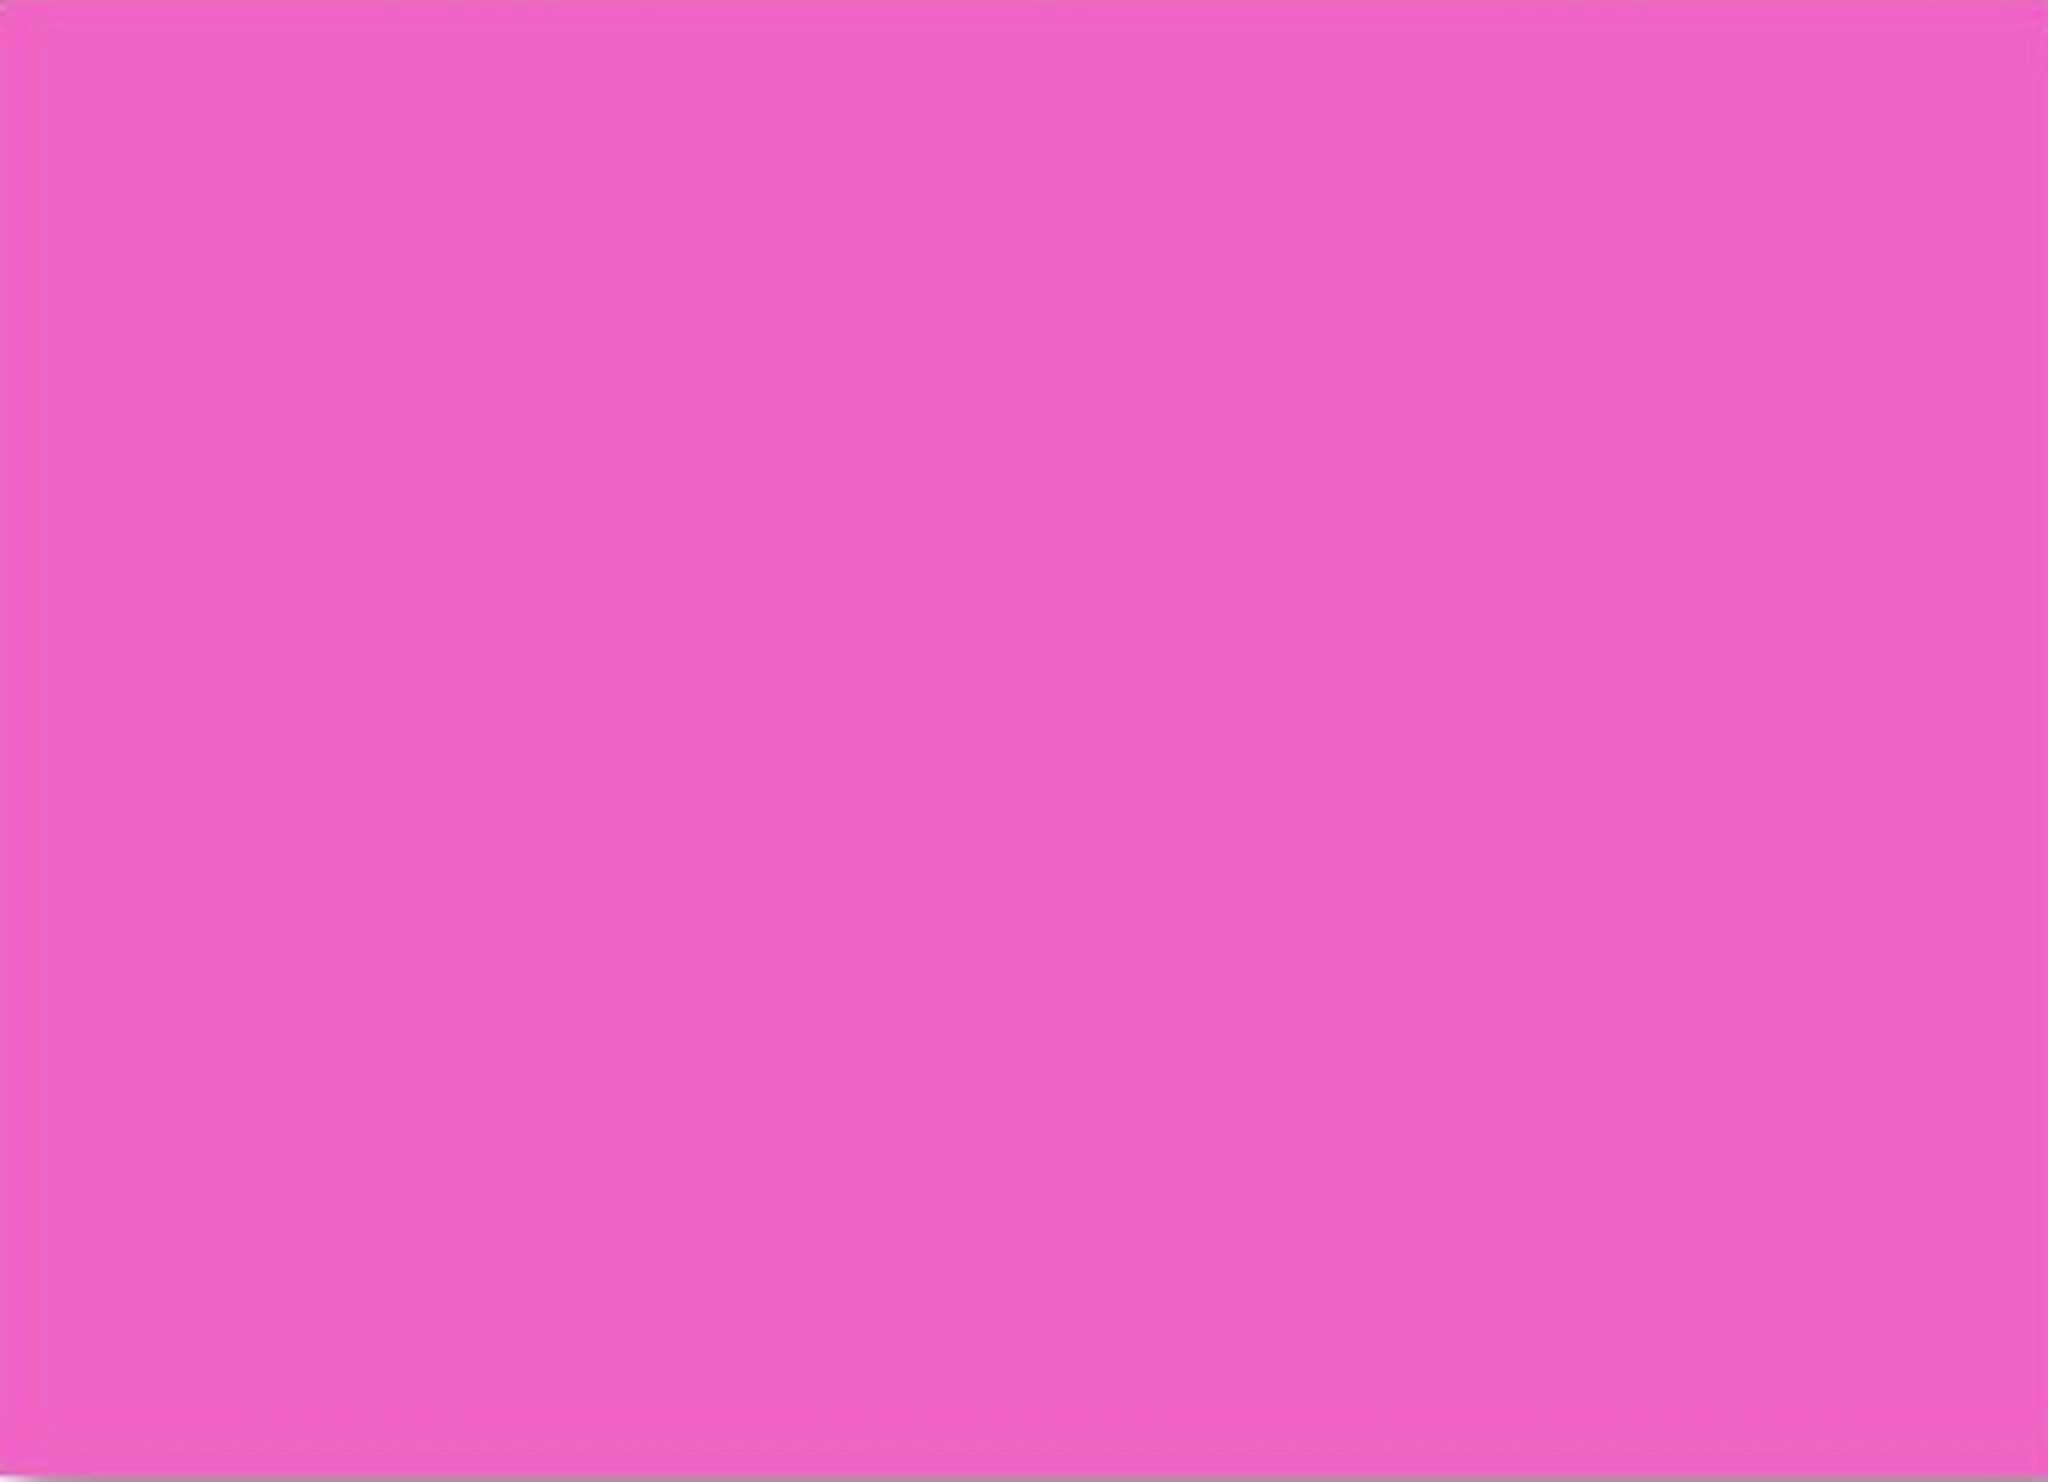 Plain Neon Pink Backgrounds For   plain neon pink